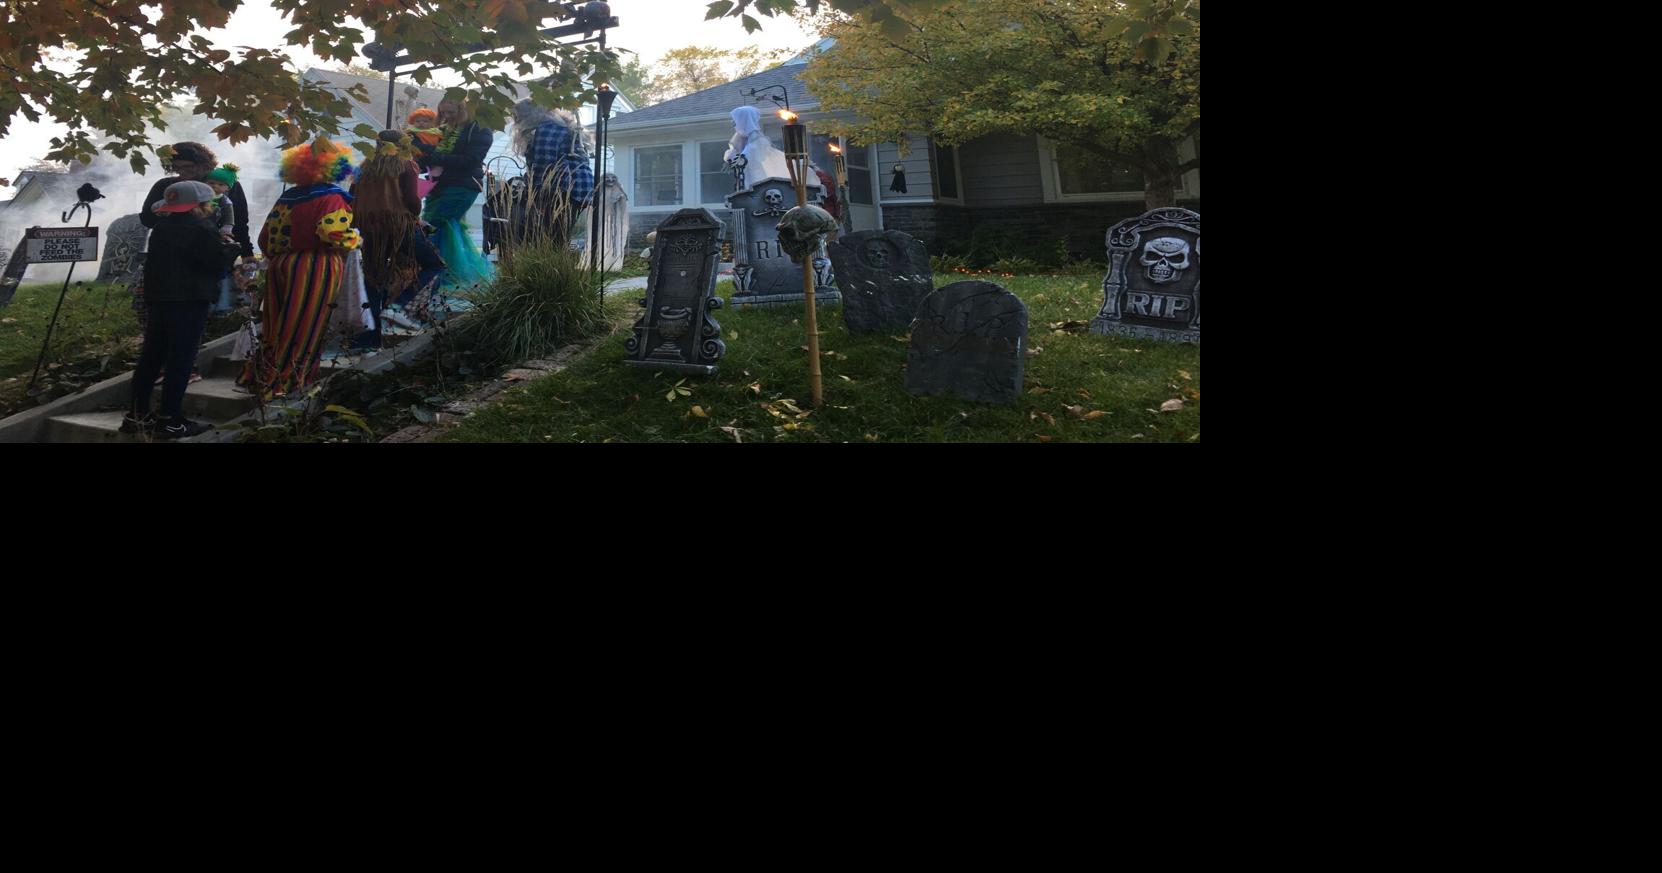 Omaha trickortreaters, and those doing the treating, glad to back